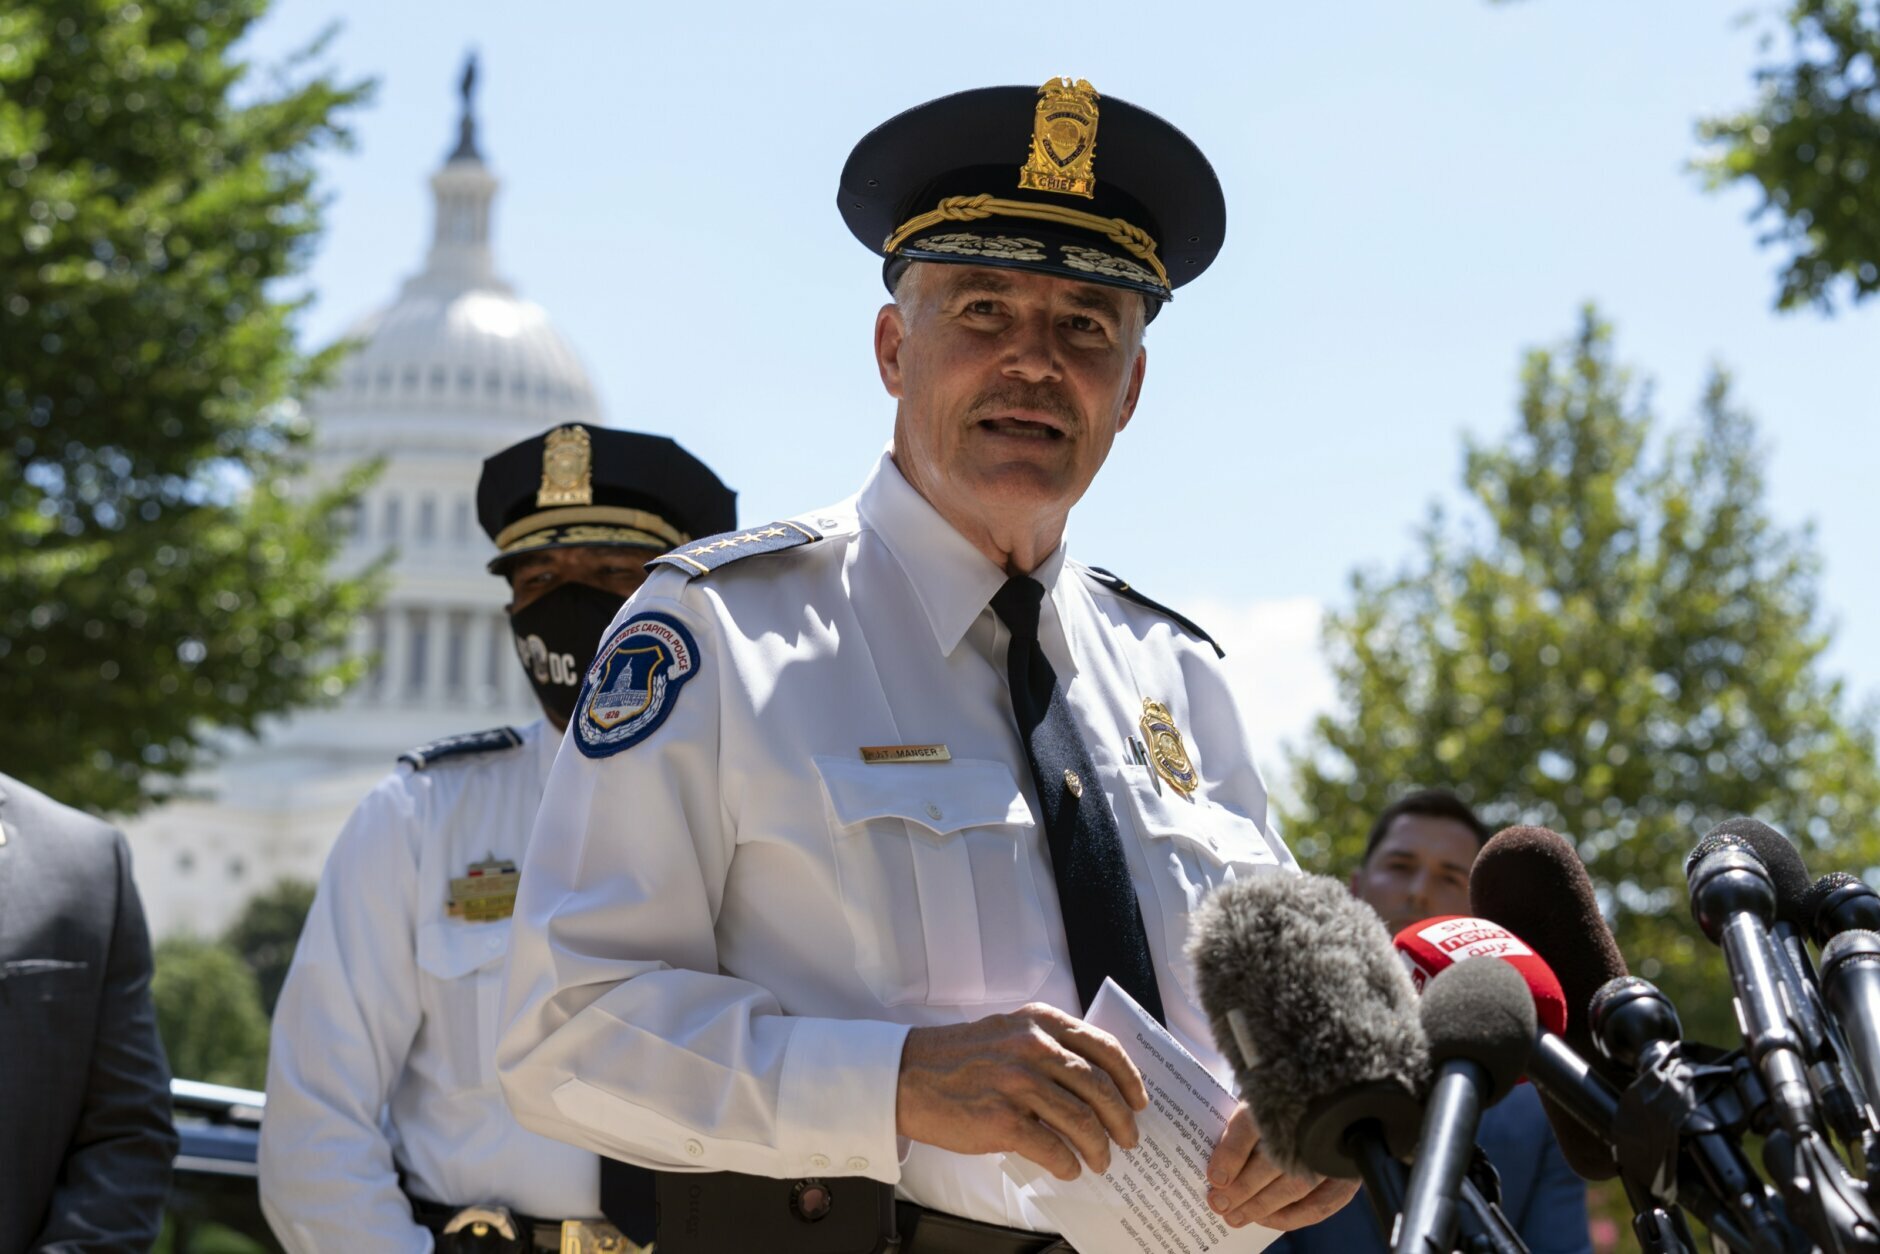 U.S. Capitol Police Chief J. Thomas Manger speaks to reporters about police investigation on a report of a possible explosive device in a pickup truck outside the Library of Congress, on Capitol Hill in Washington on Thursday, Aug. 19, 2021. (AP Photo/Jose Luis Magana)